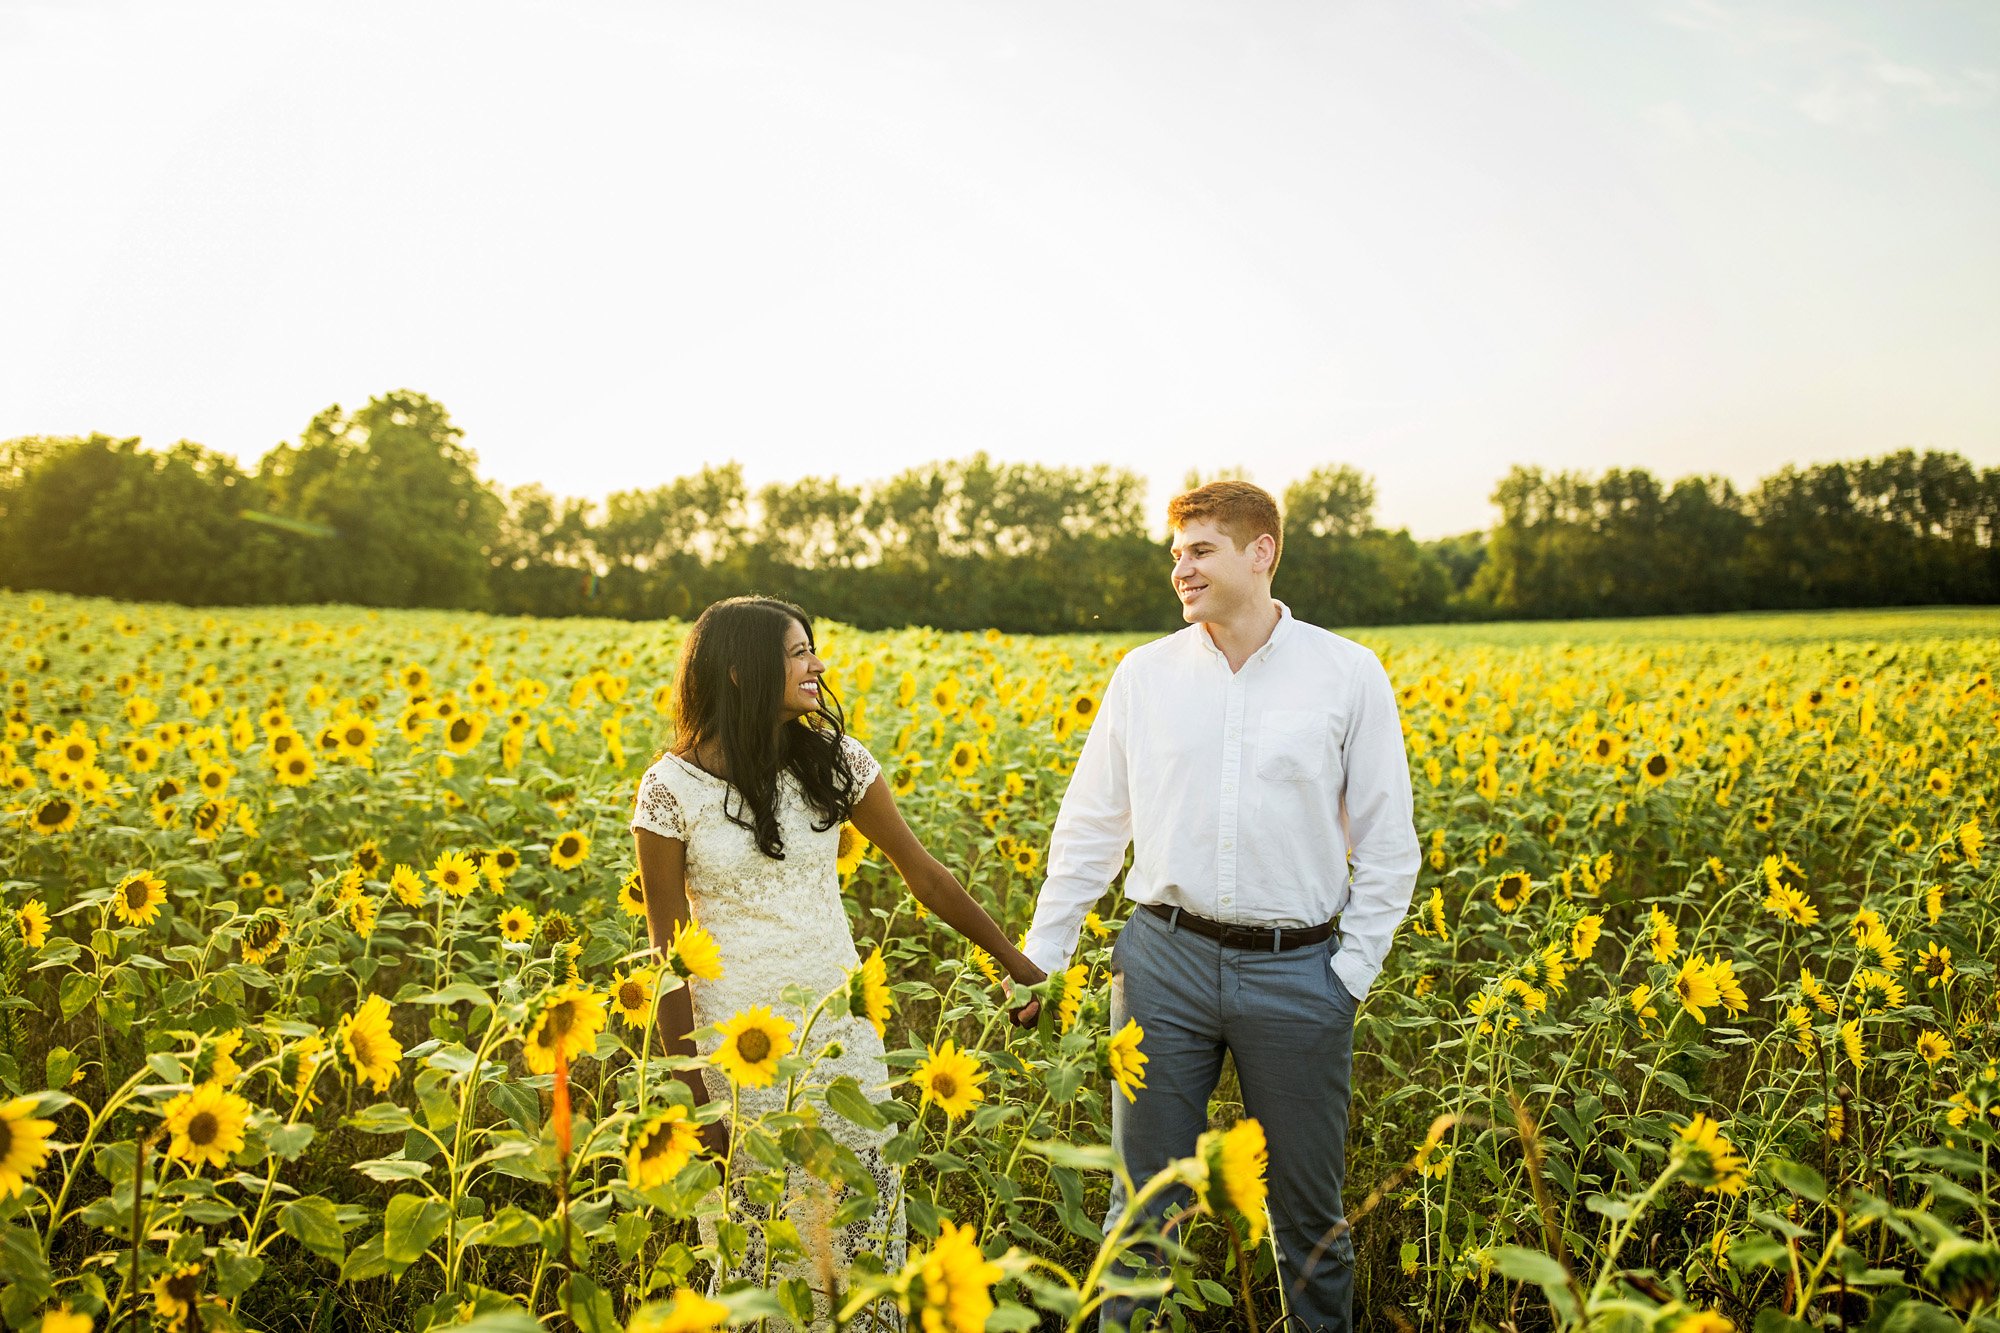 Seriously_Sabrina_Photography_Lexington_Midway_Kentucky_Engagement_Merefield_Sunflowers_Naz_and_Drew17.jpg